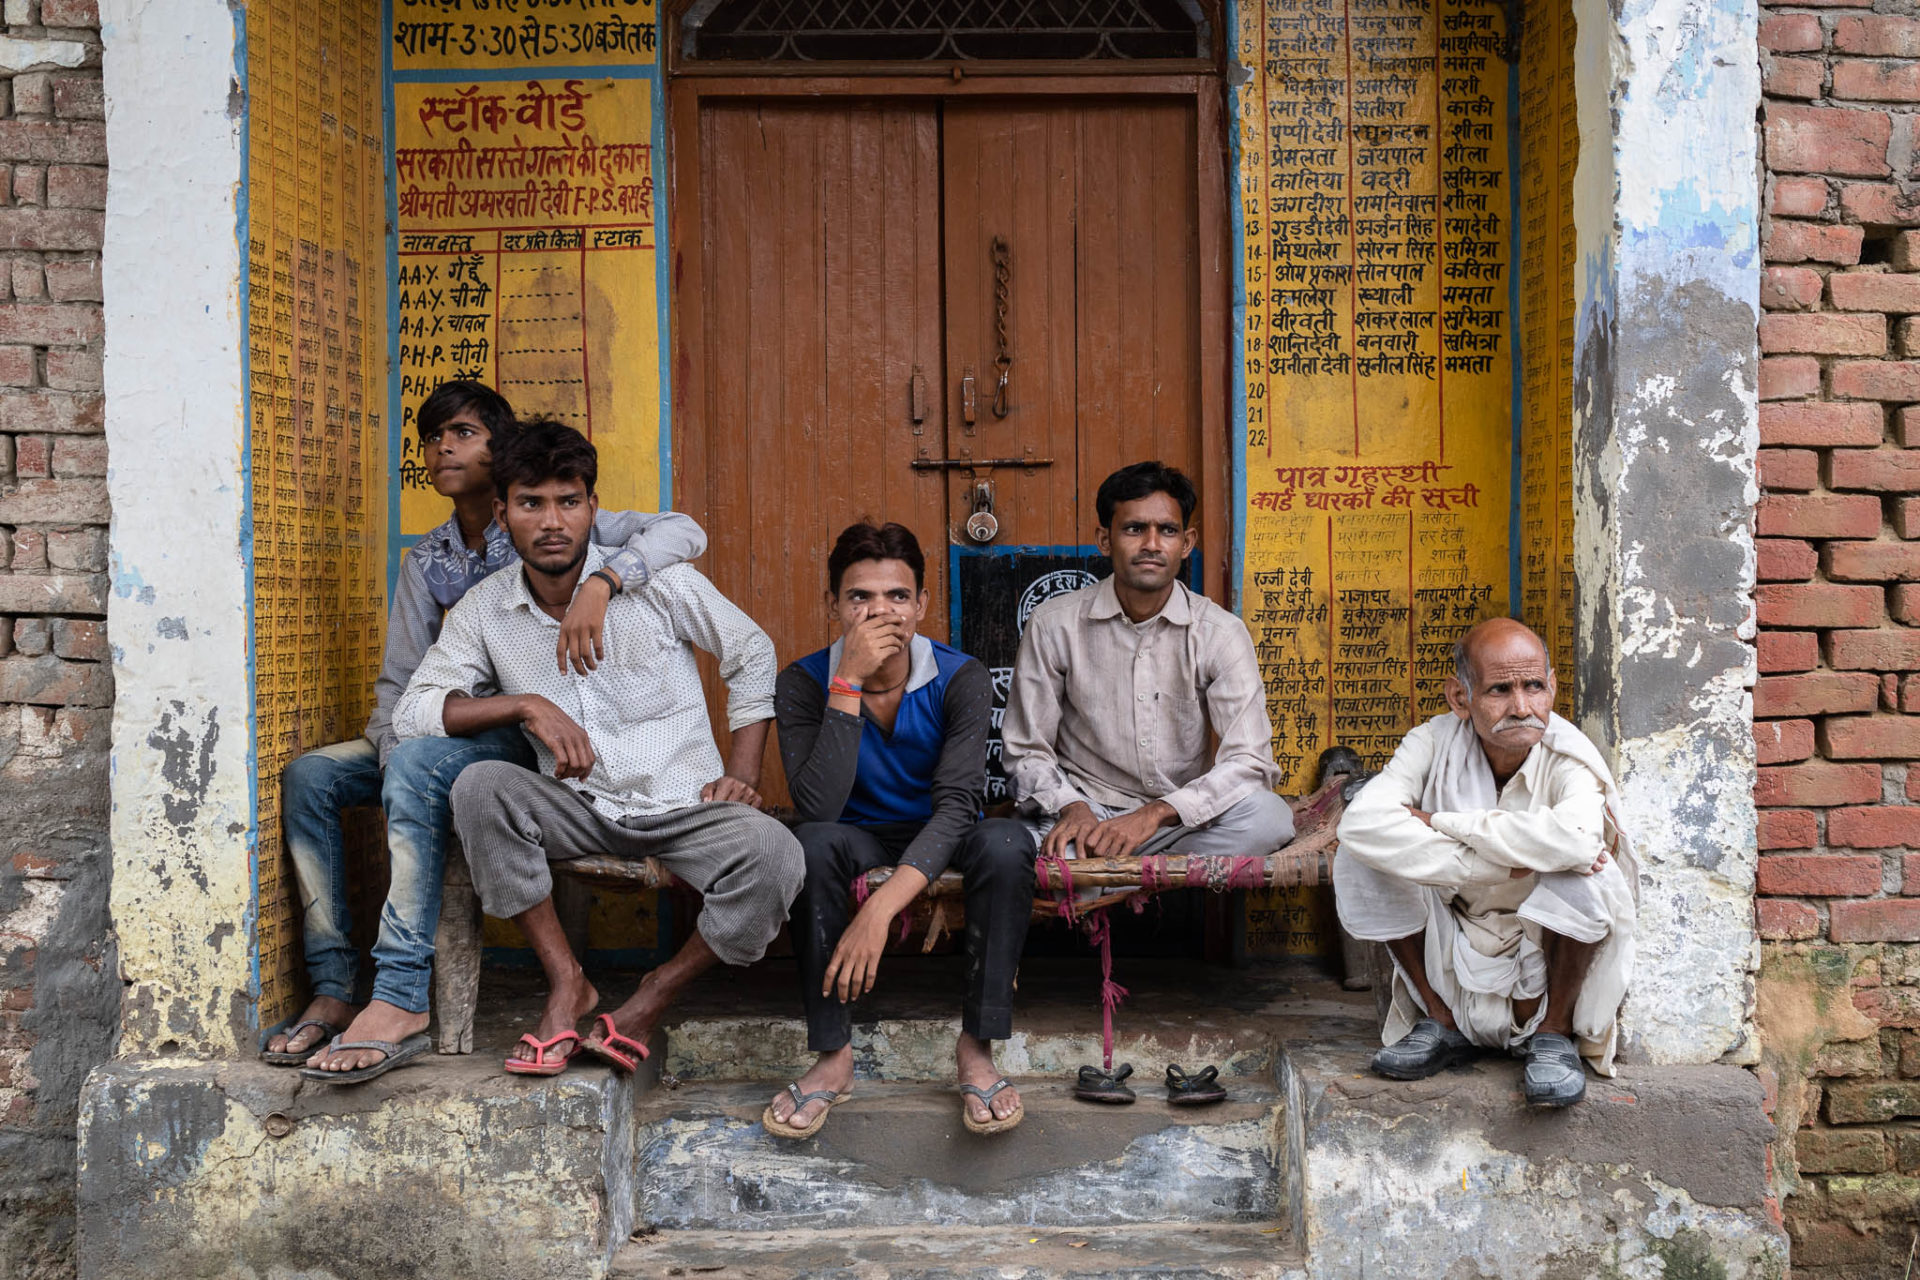 Villagers from the dalit community in Basai Babas Village, Uttar